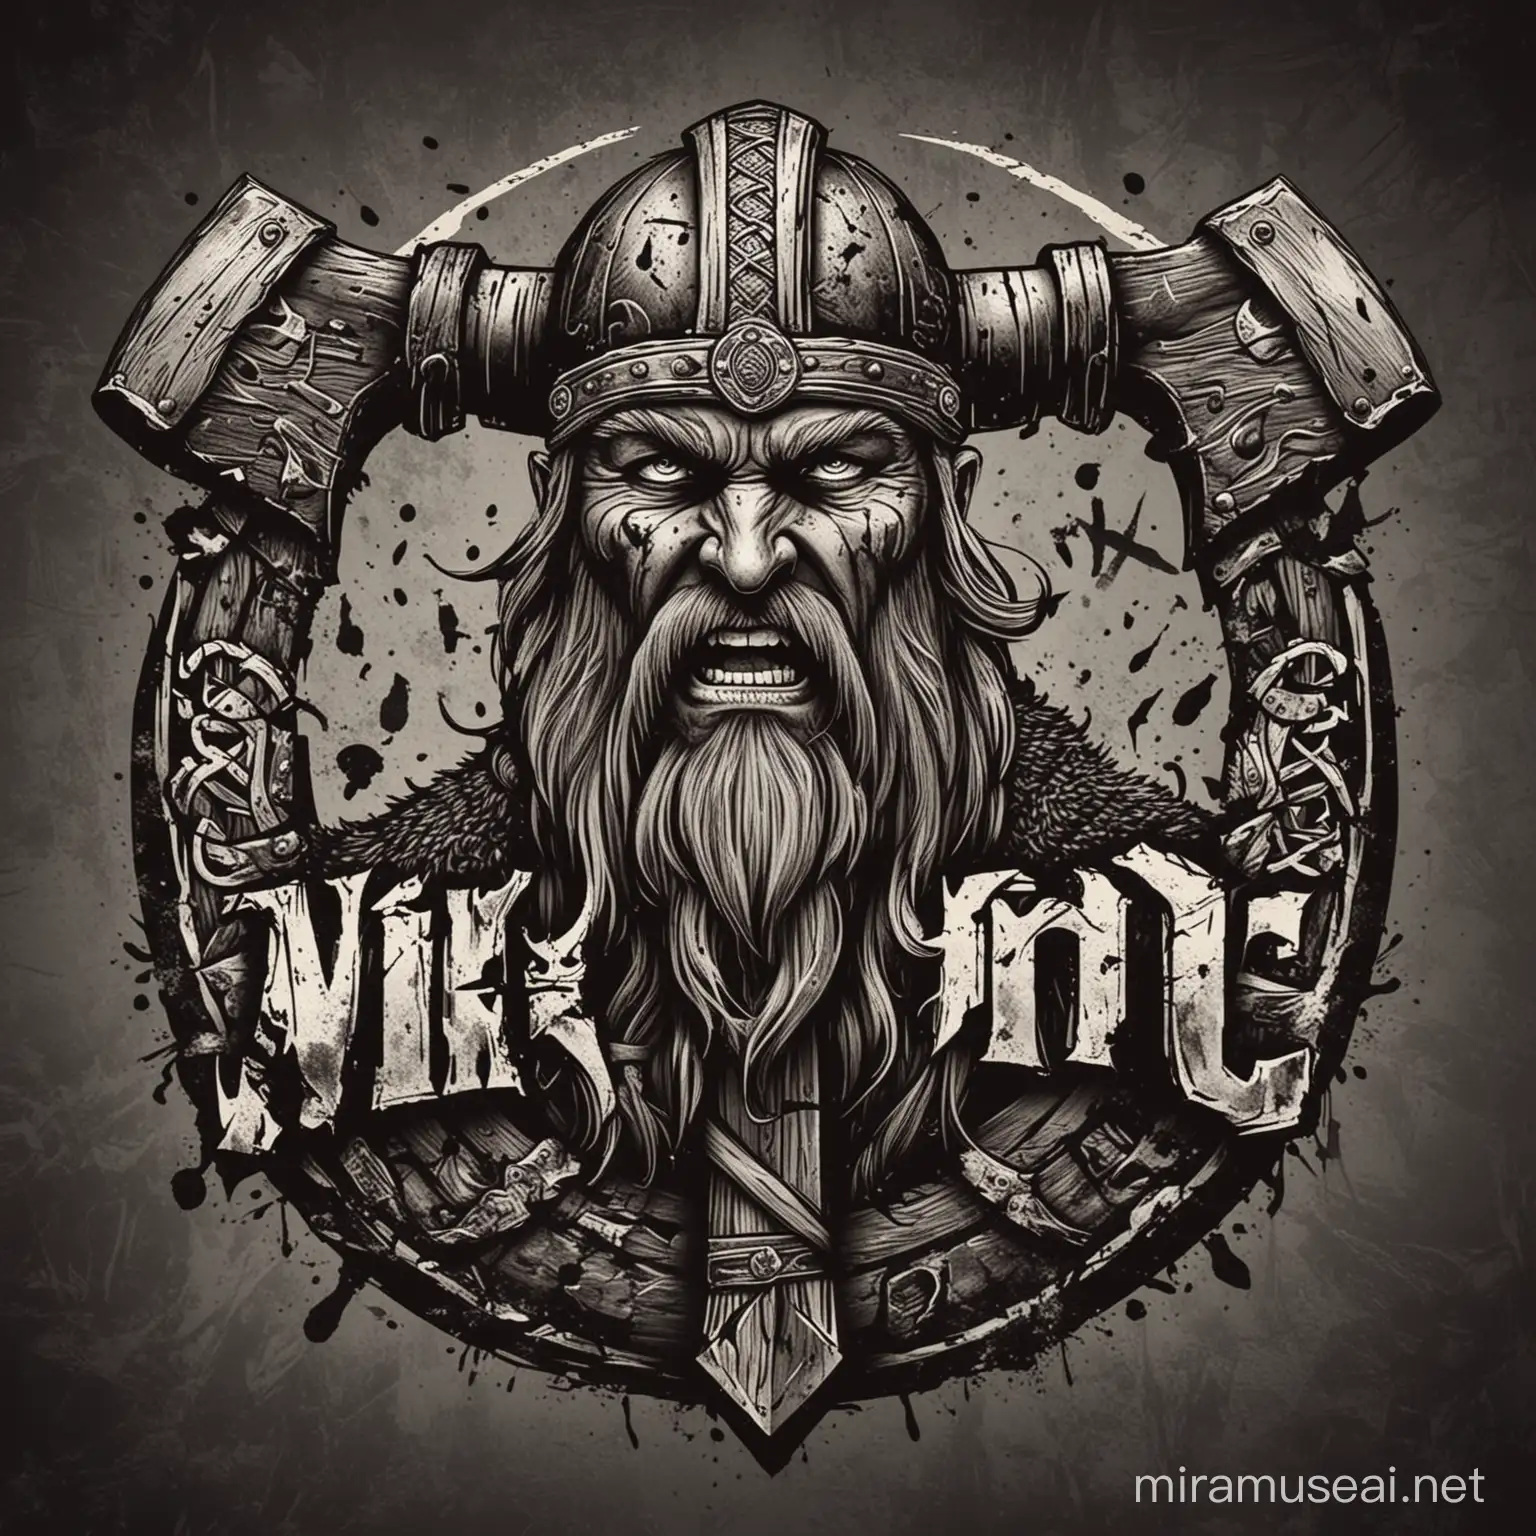 Fierce Viking Warrior Emblem with Axe Symbolizing Strength and Intensity